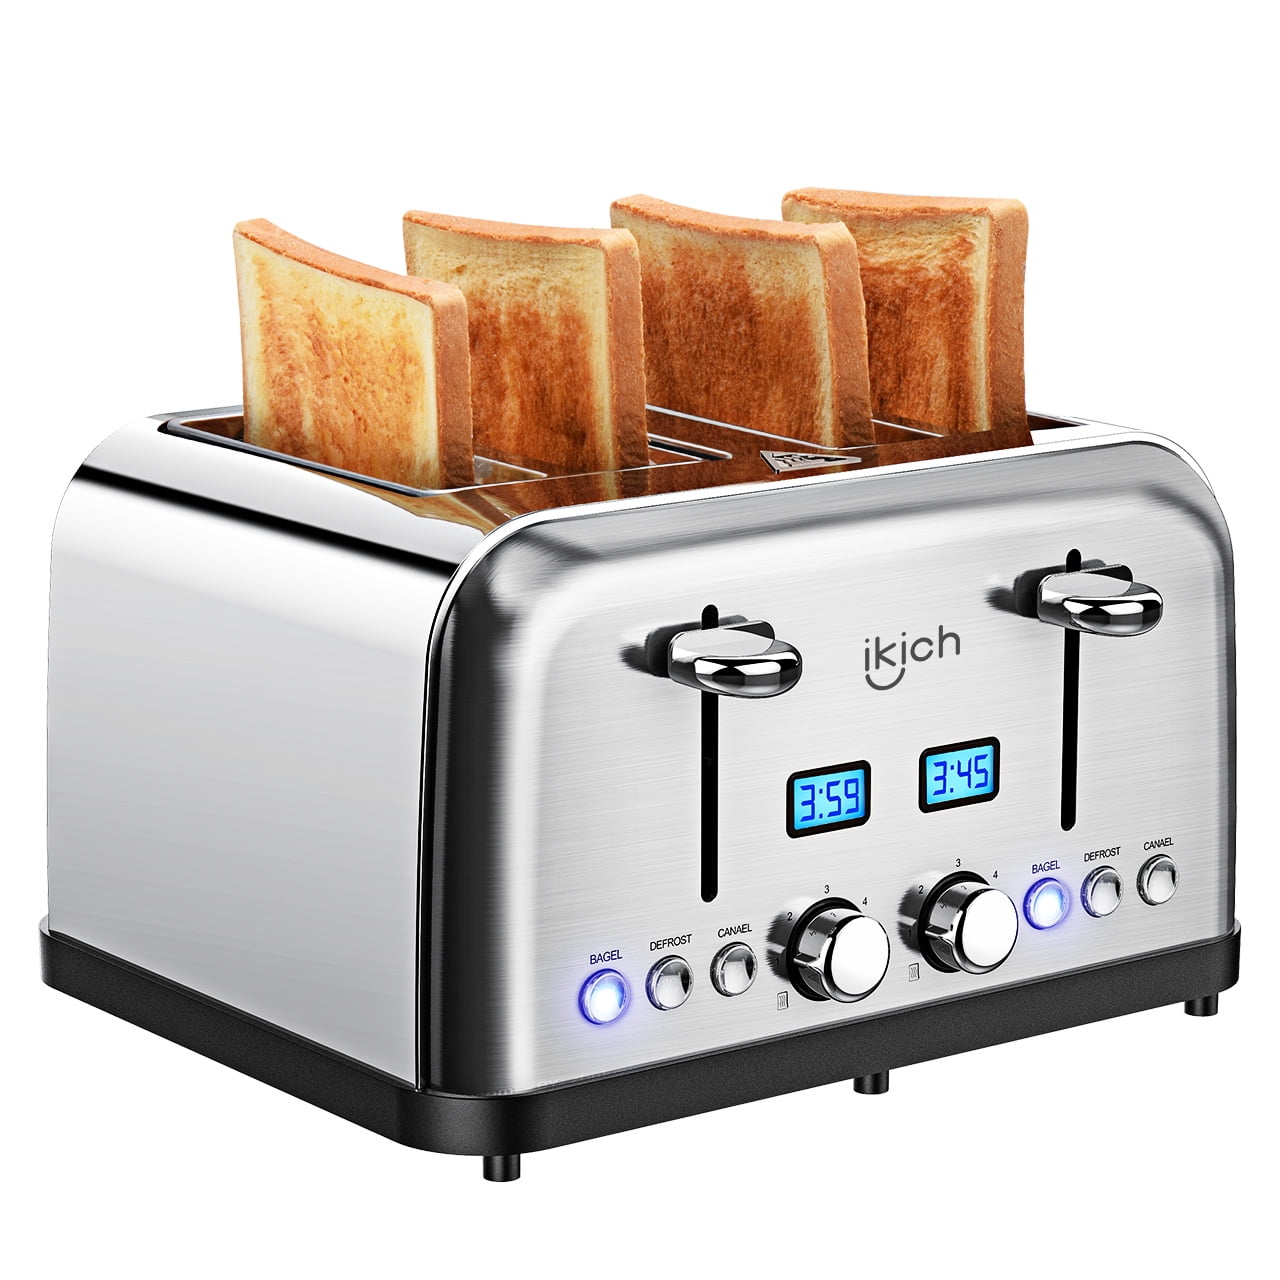 Extra-Wide Toaster Bread Toasting Slot Compact Stainless Steel Toaster for Bread Waffle Bagel Toaster 4 Slice 7 Toast Shade Settings 3 Function with Crumb Trays and 2 High Lift Lever 1500W 